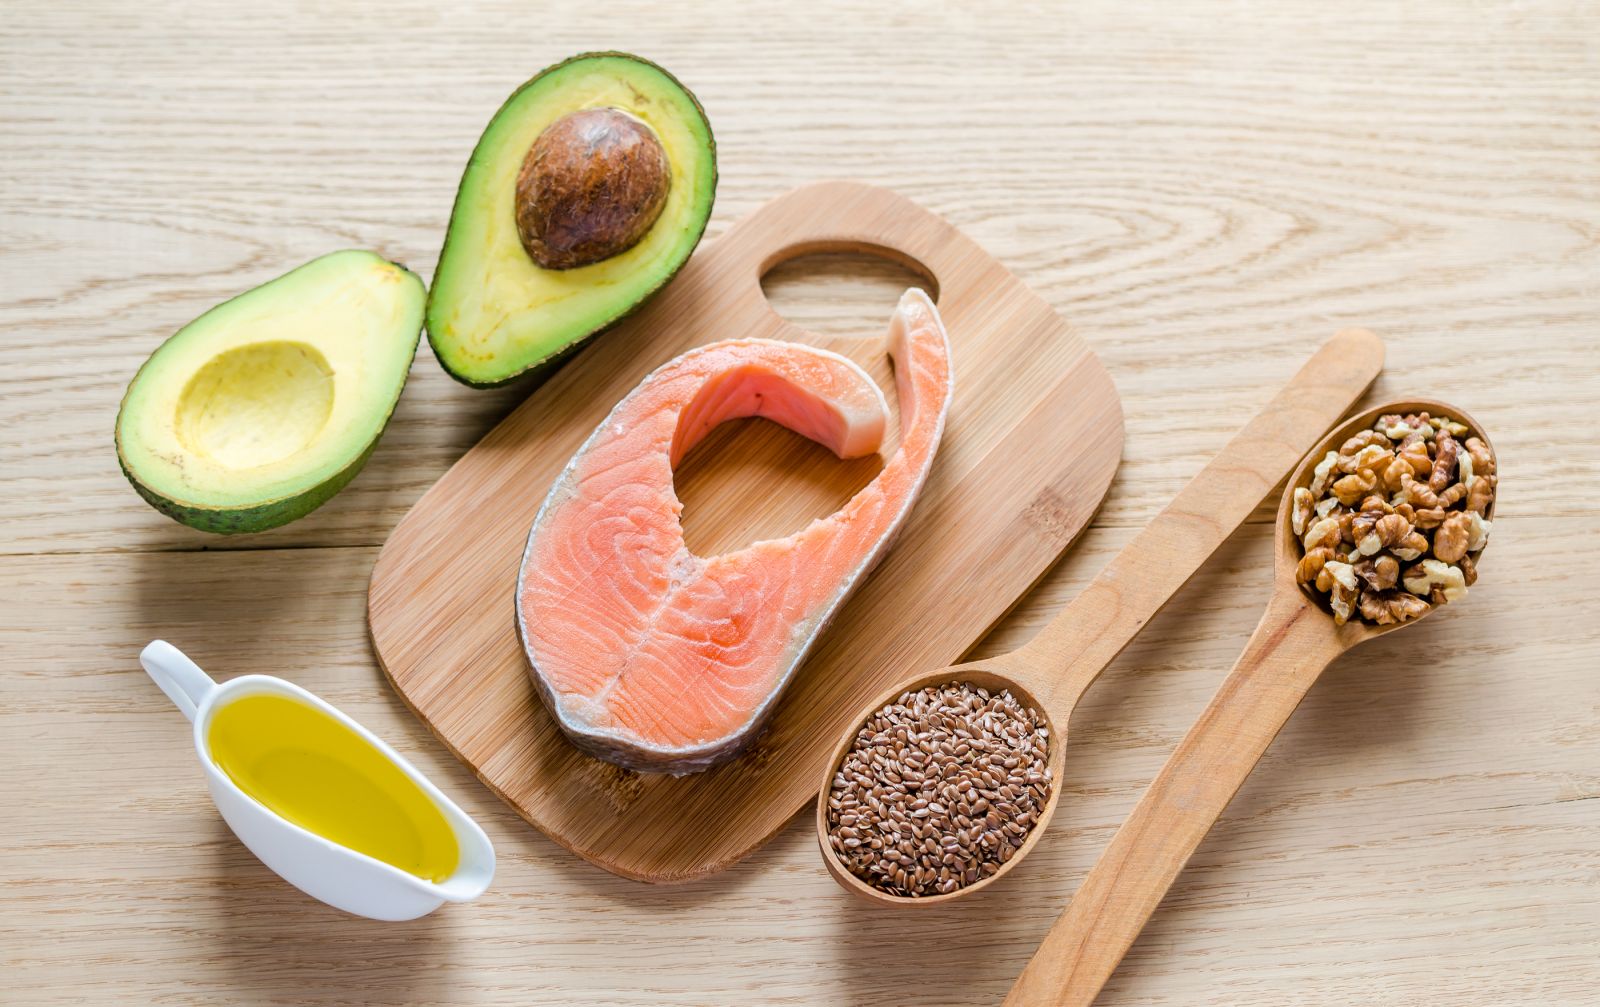 Good sources of monounsaturated fats are olive oil, peanut oil, canola oil, avocados, most nuts, high-oleic safflower and sunflower oils